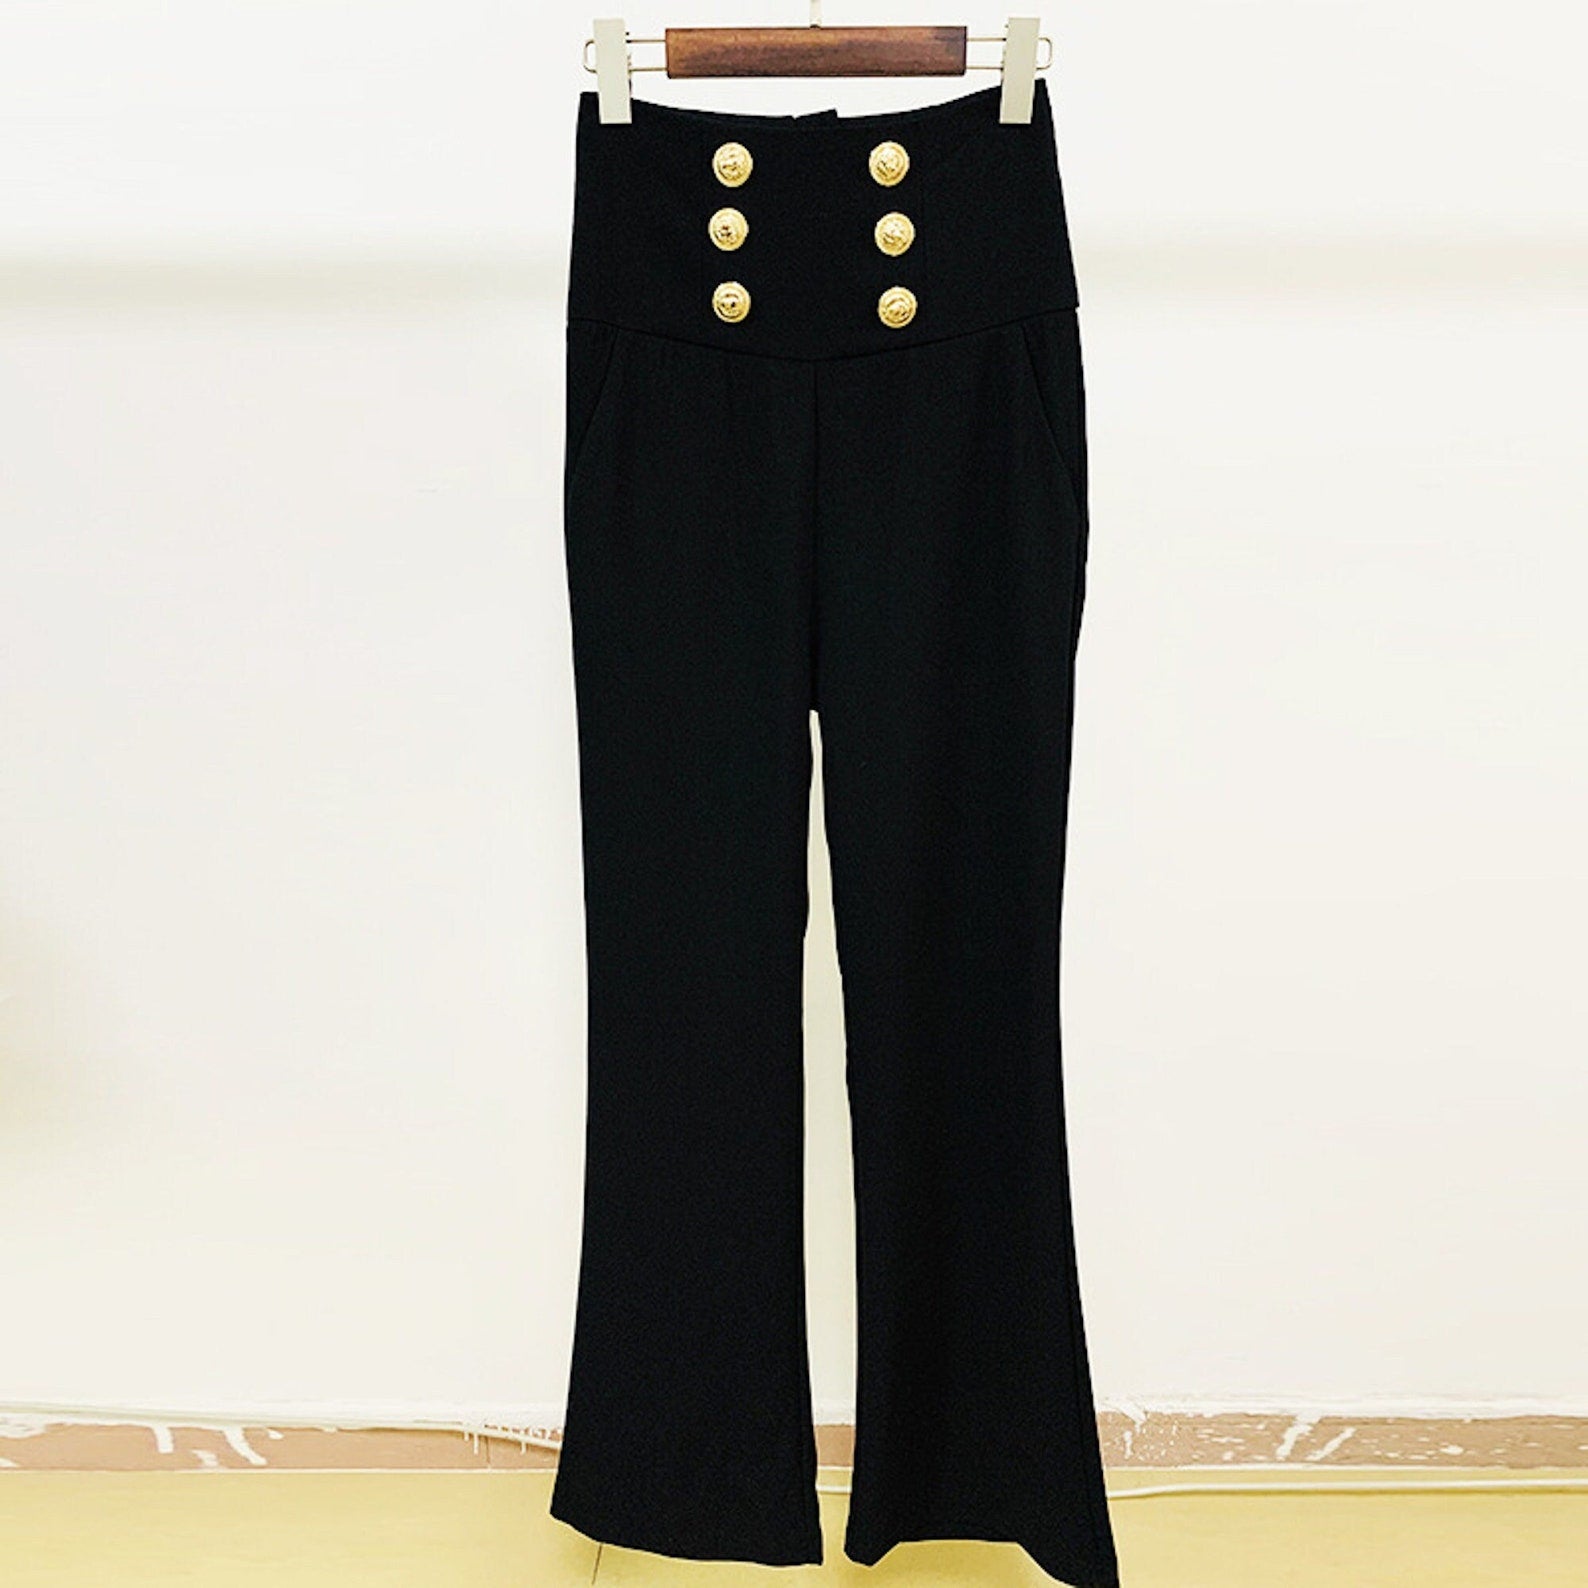 FashionPioneer - Women Golden Lion buttons Flare Long Trousers Black , comfortable and relaxed with an elasticated waistband finish and pull-on construction. We love the soft  fabric because it's wrinkle and crease free with a beautiful drape. Each style is handmade in our studios with discrete stitching. Perfect for work or weekends, style up with heels or down with trainers or sandals.